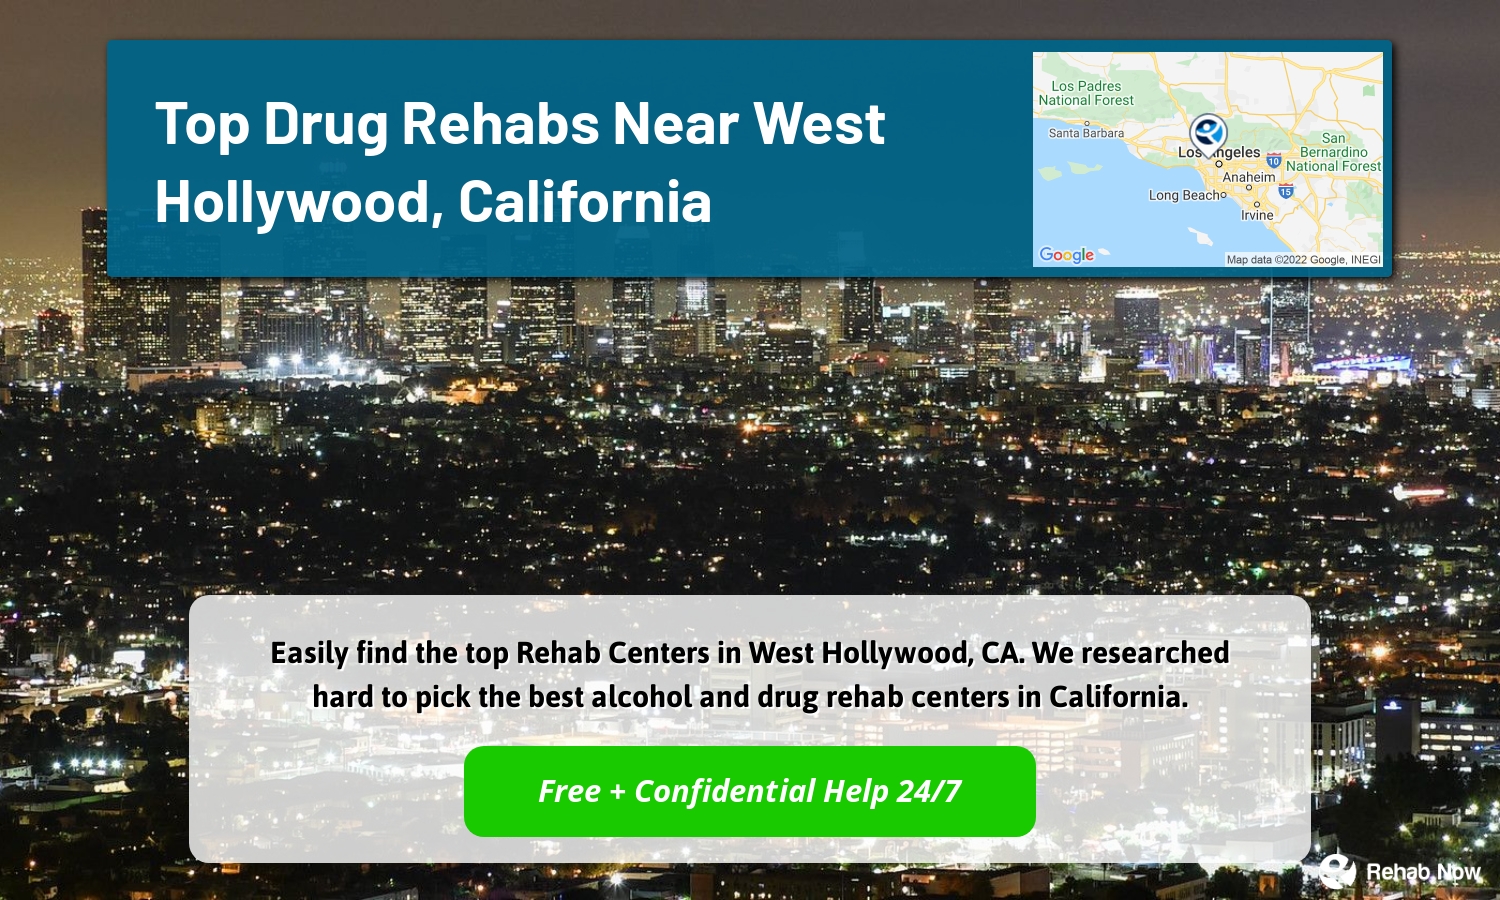 Easily find the top Rehab Centers in West Hollywood, CA. We researched hard to pick the best alcohol and drug rehab centers in California.